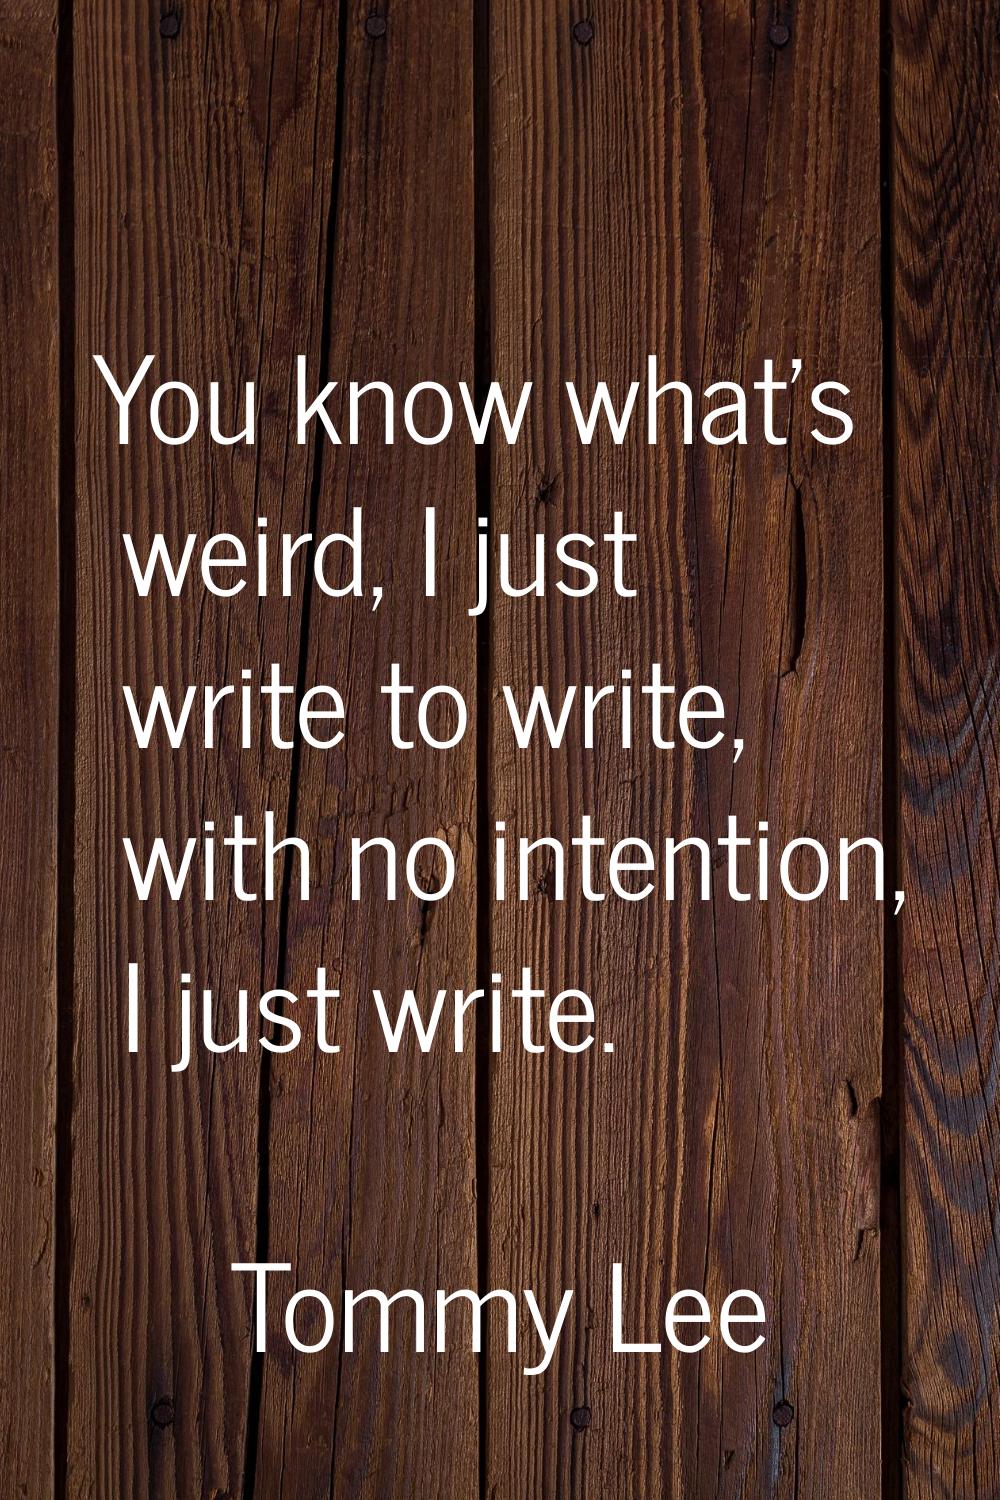 You know what's weird, I just write to write, with no intention, I just write.